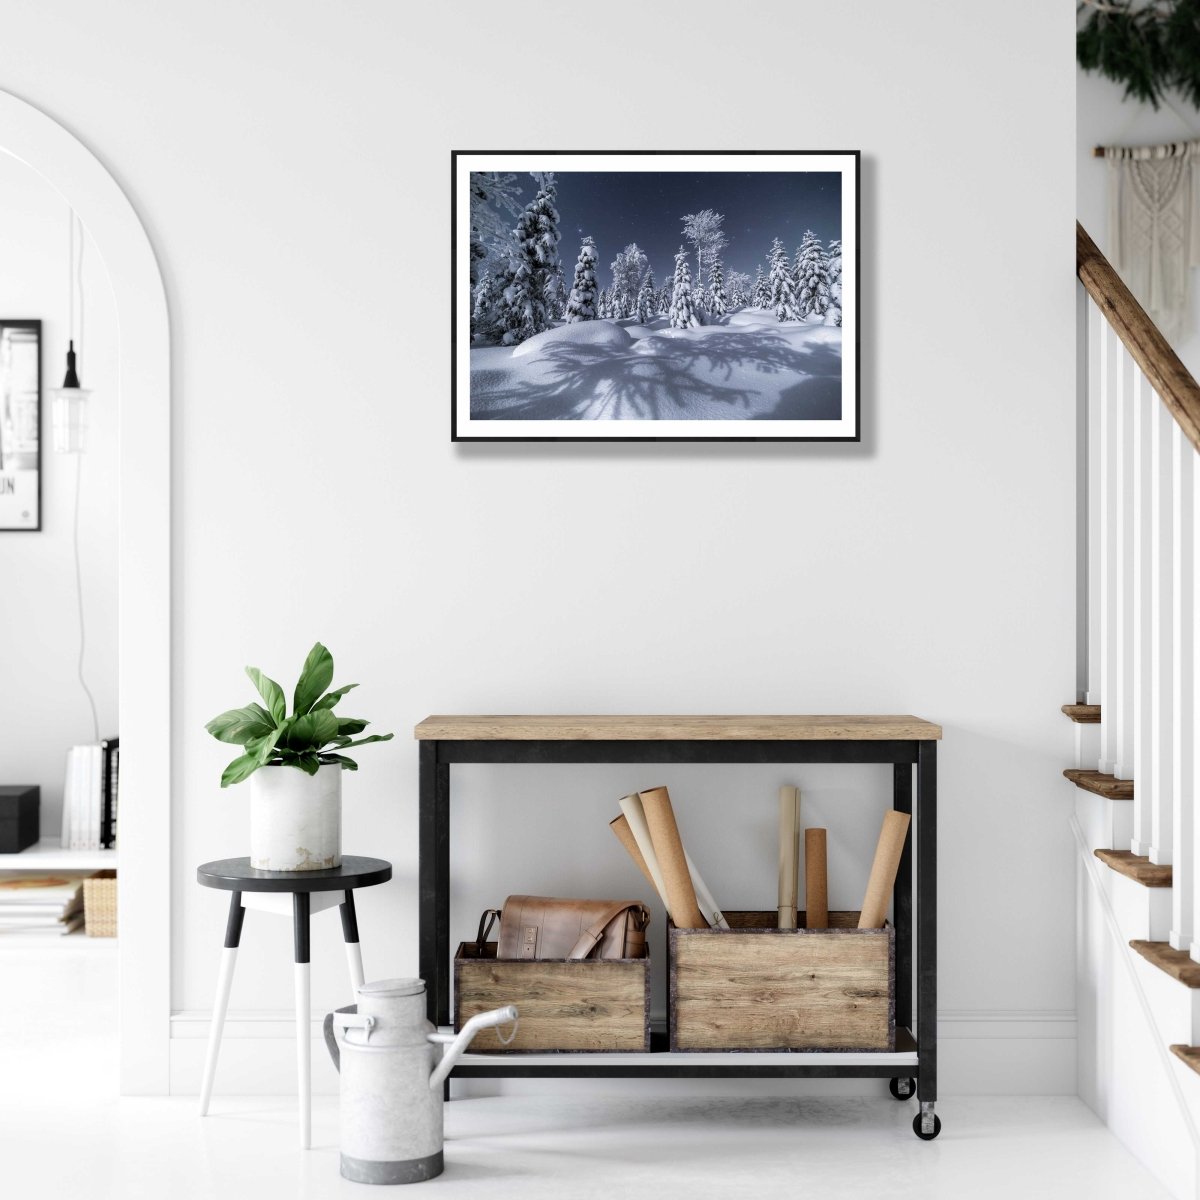 Framed photo of Finnish forest winter night, silvery moonlight, snow, hare tracks, starry sky, white living room wall.